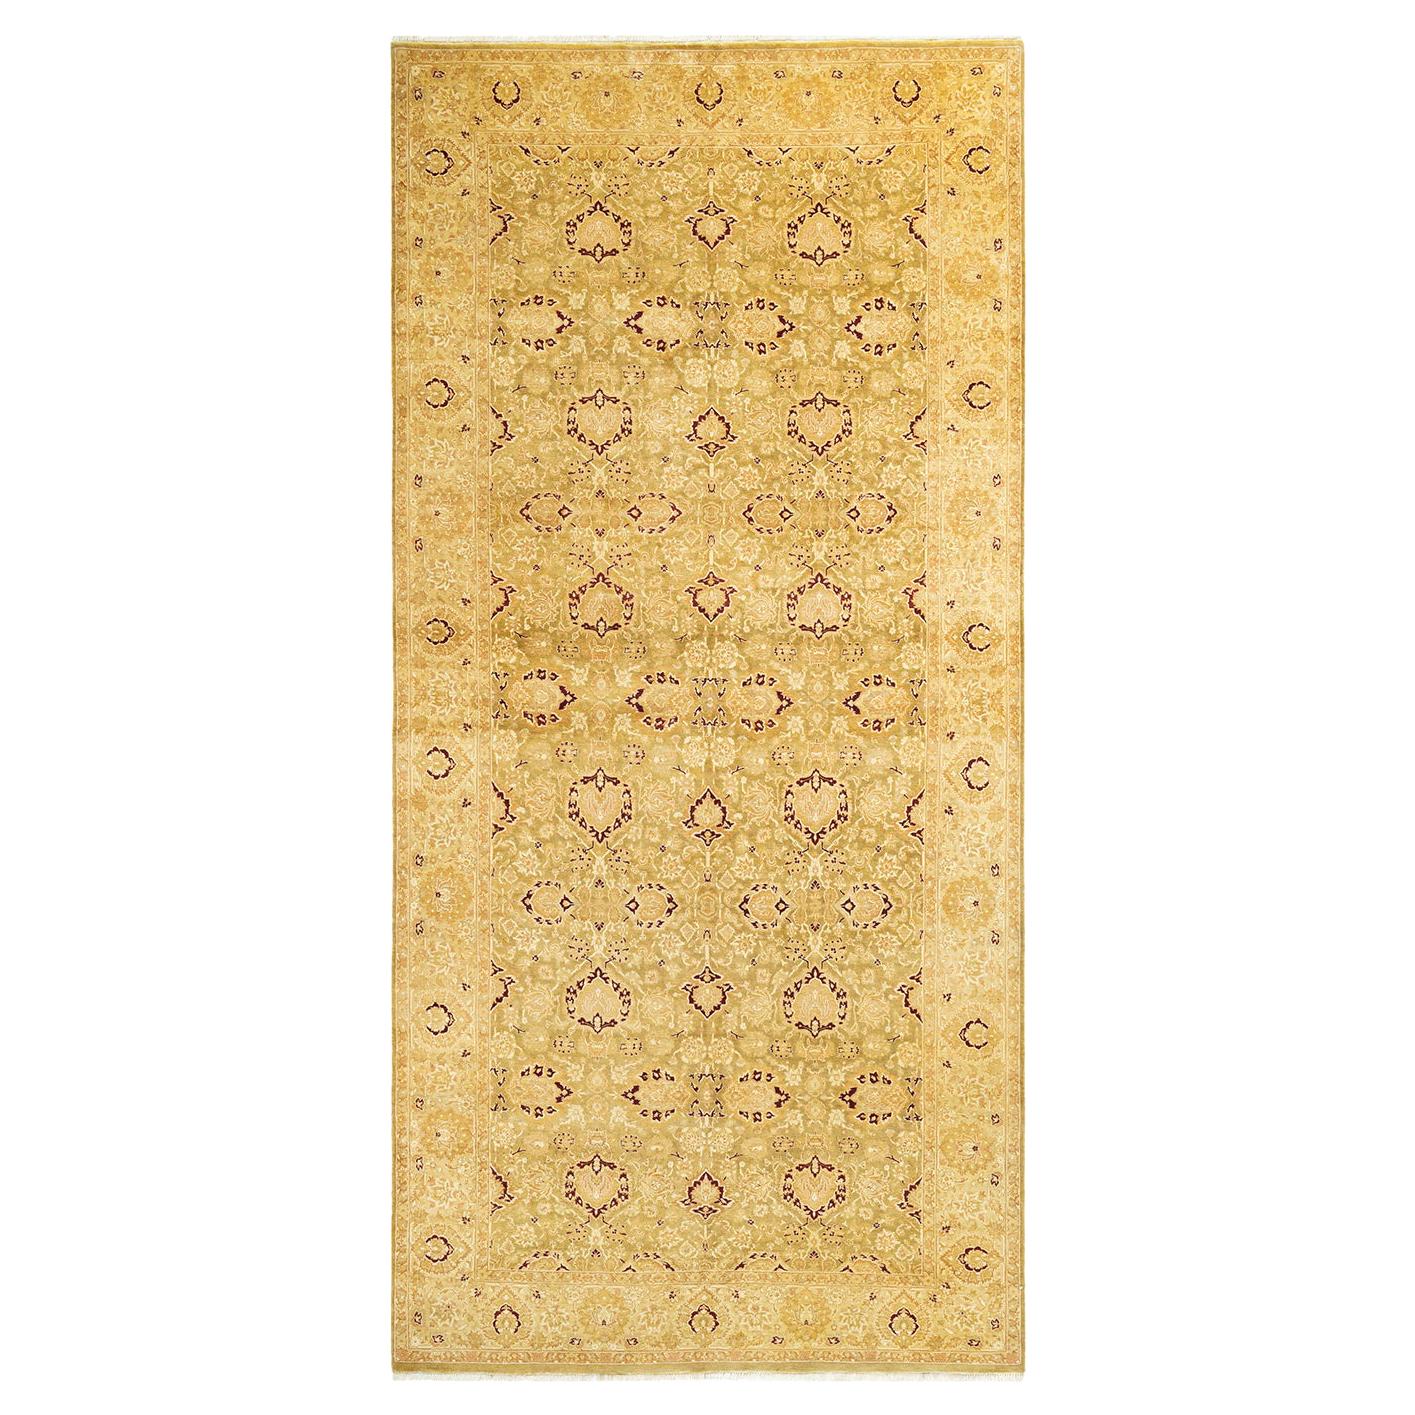 Mogul, One-of-a-Kind Hand-Knotted Runner, Green